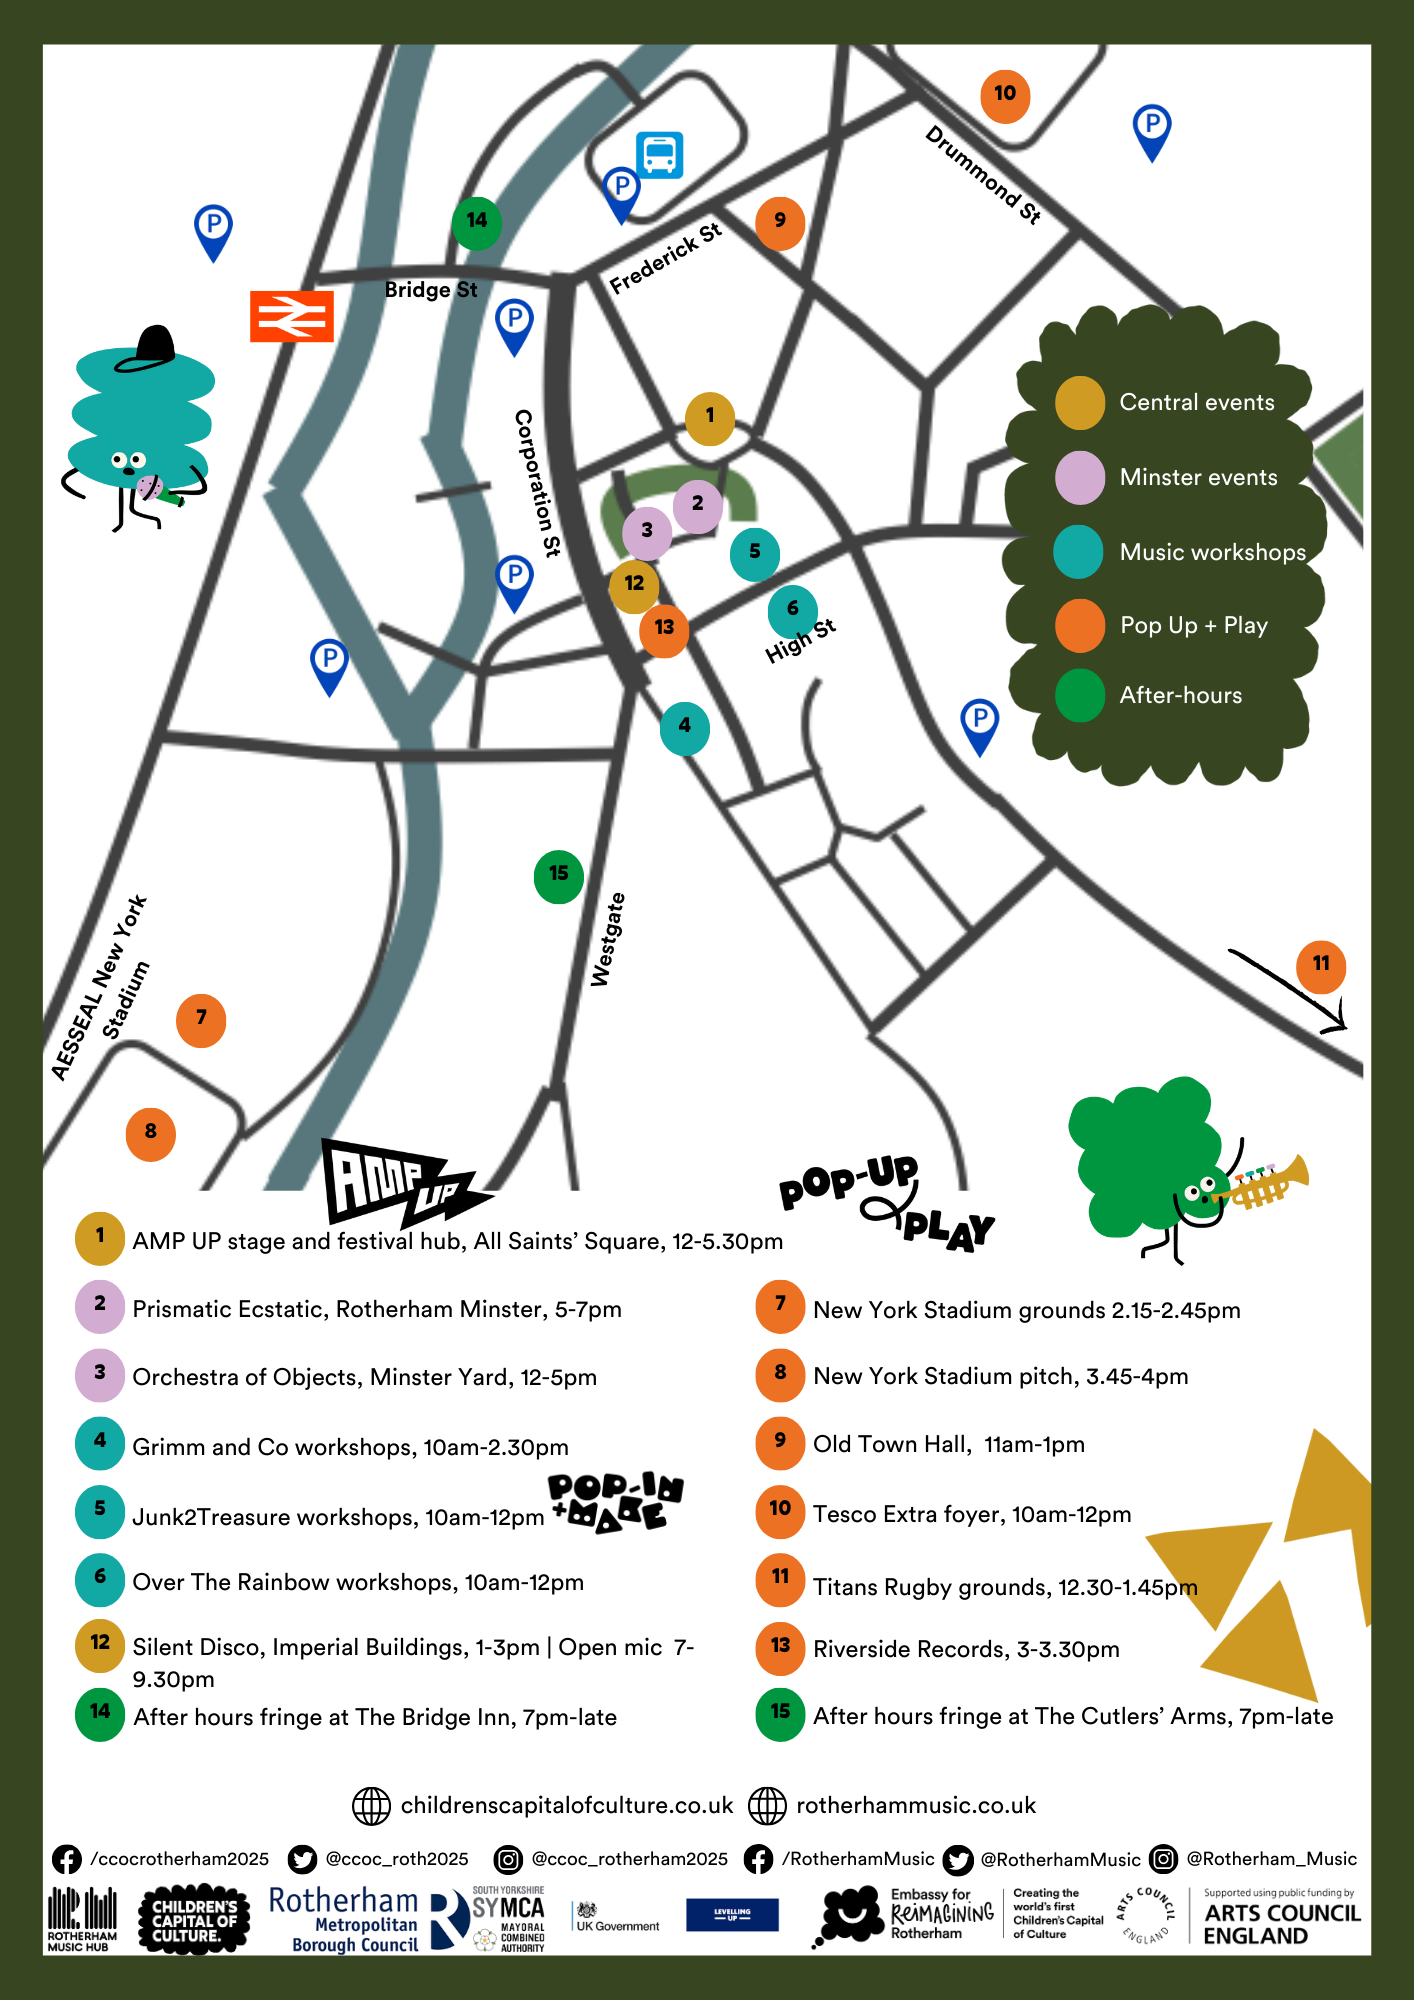 Map of Rotherham town centre with key and plot of main events of the Signals Saturday Shindig.